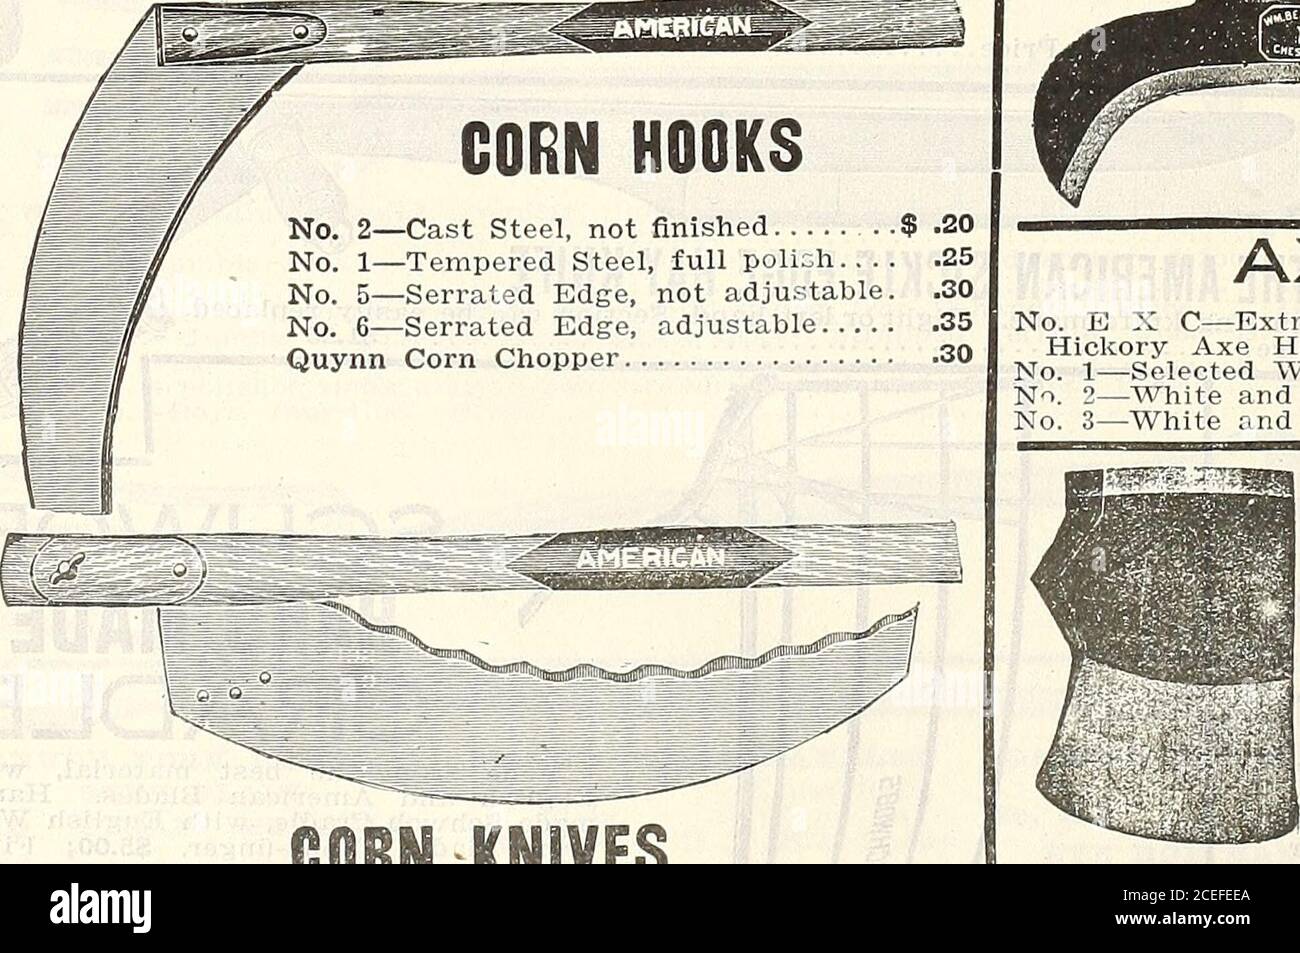 . 1916 Griffith and Turner Co. : farm and garden supplies. No. 4 B. O. M.—Flat, Oval, 4 Tine Solid Steel $ .60 No. 4 B. O. H.—Heavy BroadOval Tines, Bent Head, 5- Foot Handle No. 5 B. O. H.—5 Tines,Heavy Broad Oval Tines,Bent Head, 5-Foot Handle. .70 BO MANURE HOOKS No. M 40—Four Oval Tines, Bent Head, Plain Ferrule, t-root Handle 9 -70 No. M 60—Six Oval Tines, Bent Head, Plain Ferrule, 6-Foot Handle ; 80. CORN HOOKS St Steel, not finished .$ .20   jnipered Steel, full polioh 25 ■Serrated Edge, not adjustable. .30 Serrated Edge, adjustable 35 Corn Chopper 30 Stock Photo